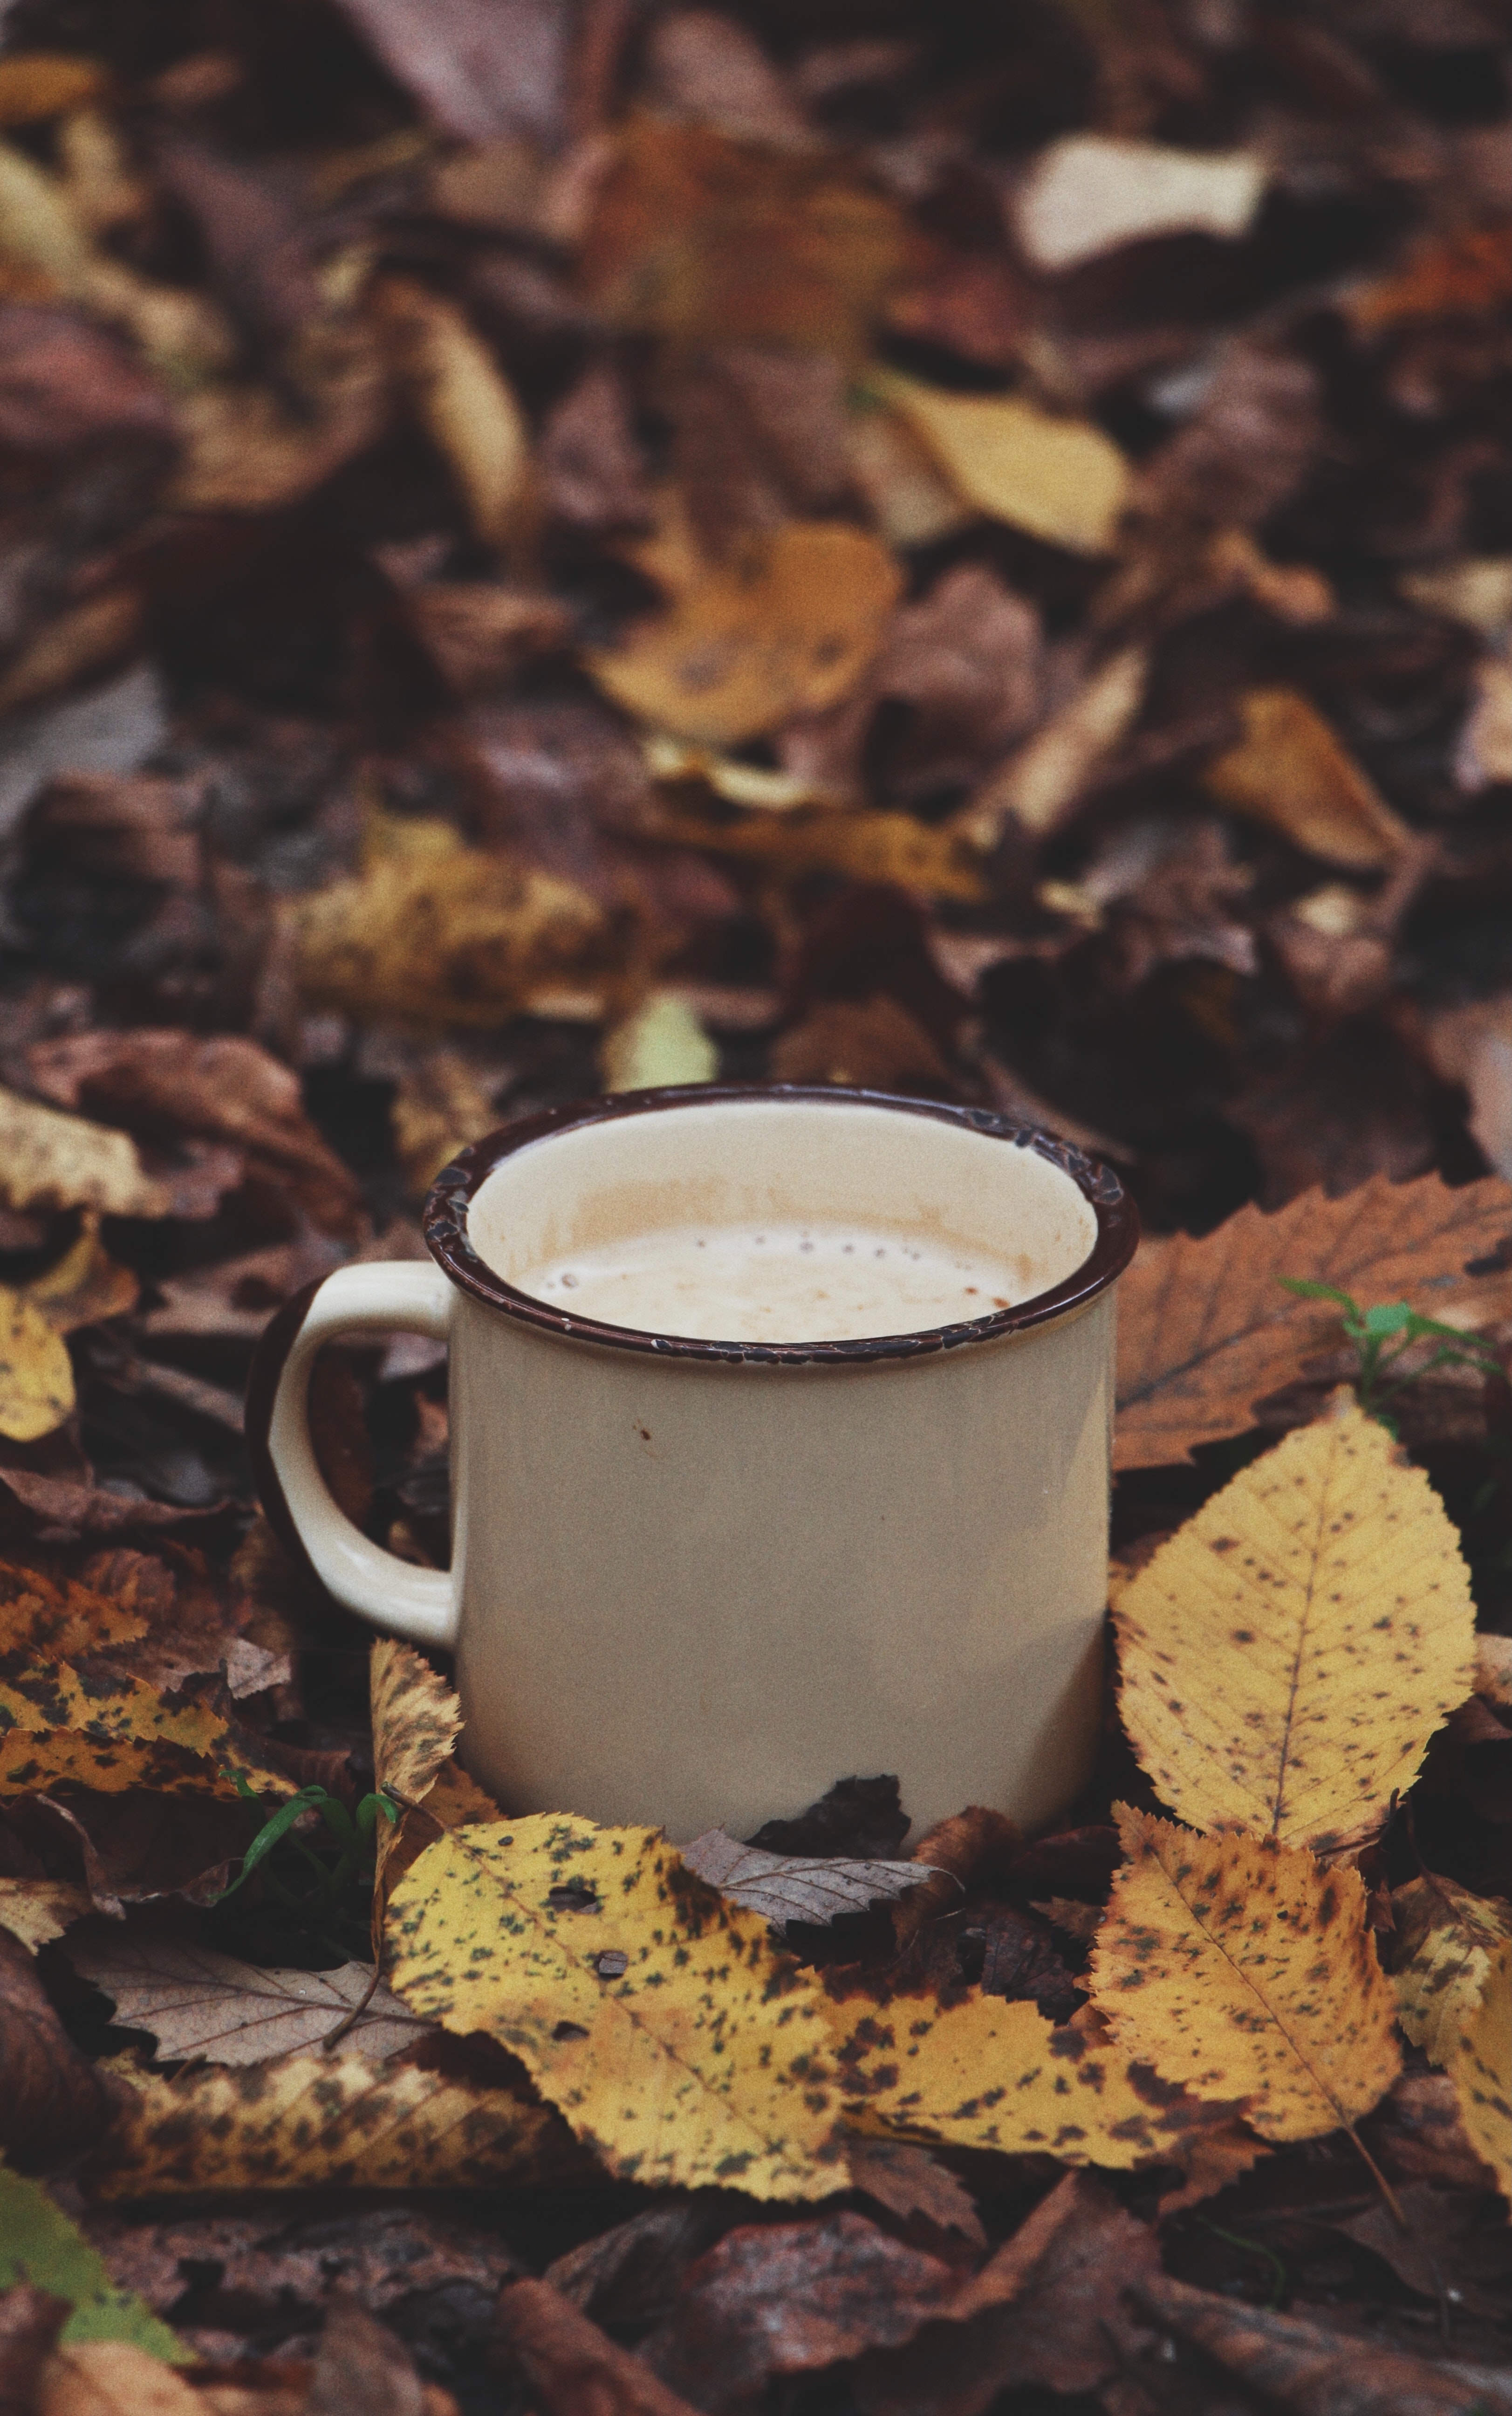 leaves, coffee, miscellanea, miscellaneous, cup, drink, beverage, mug 1080p